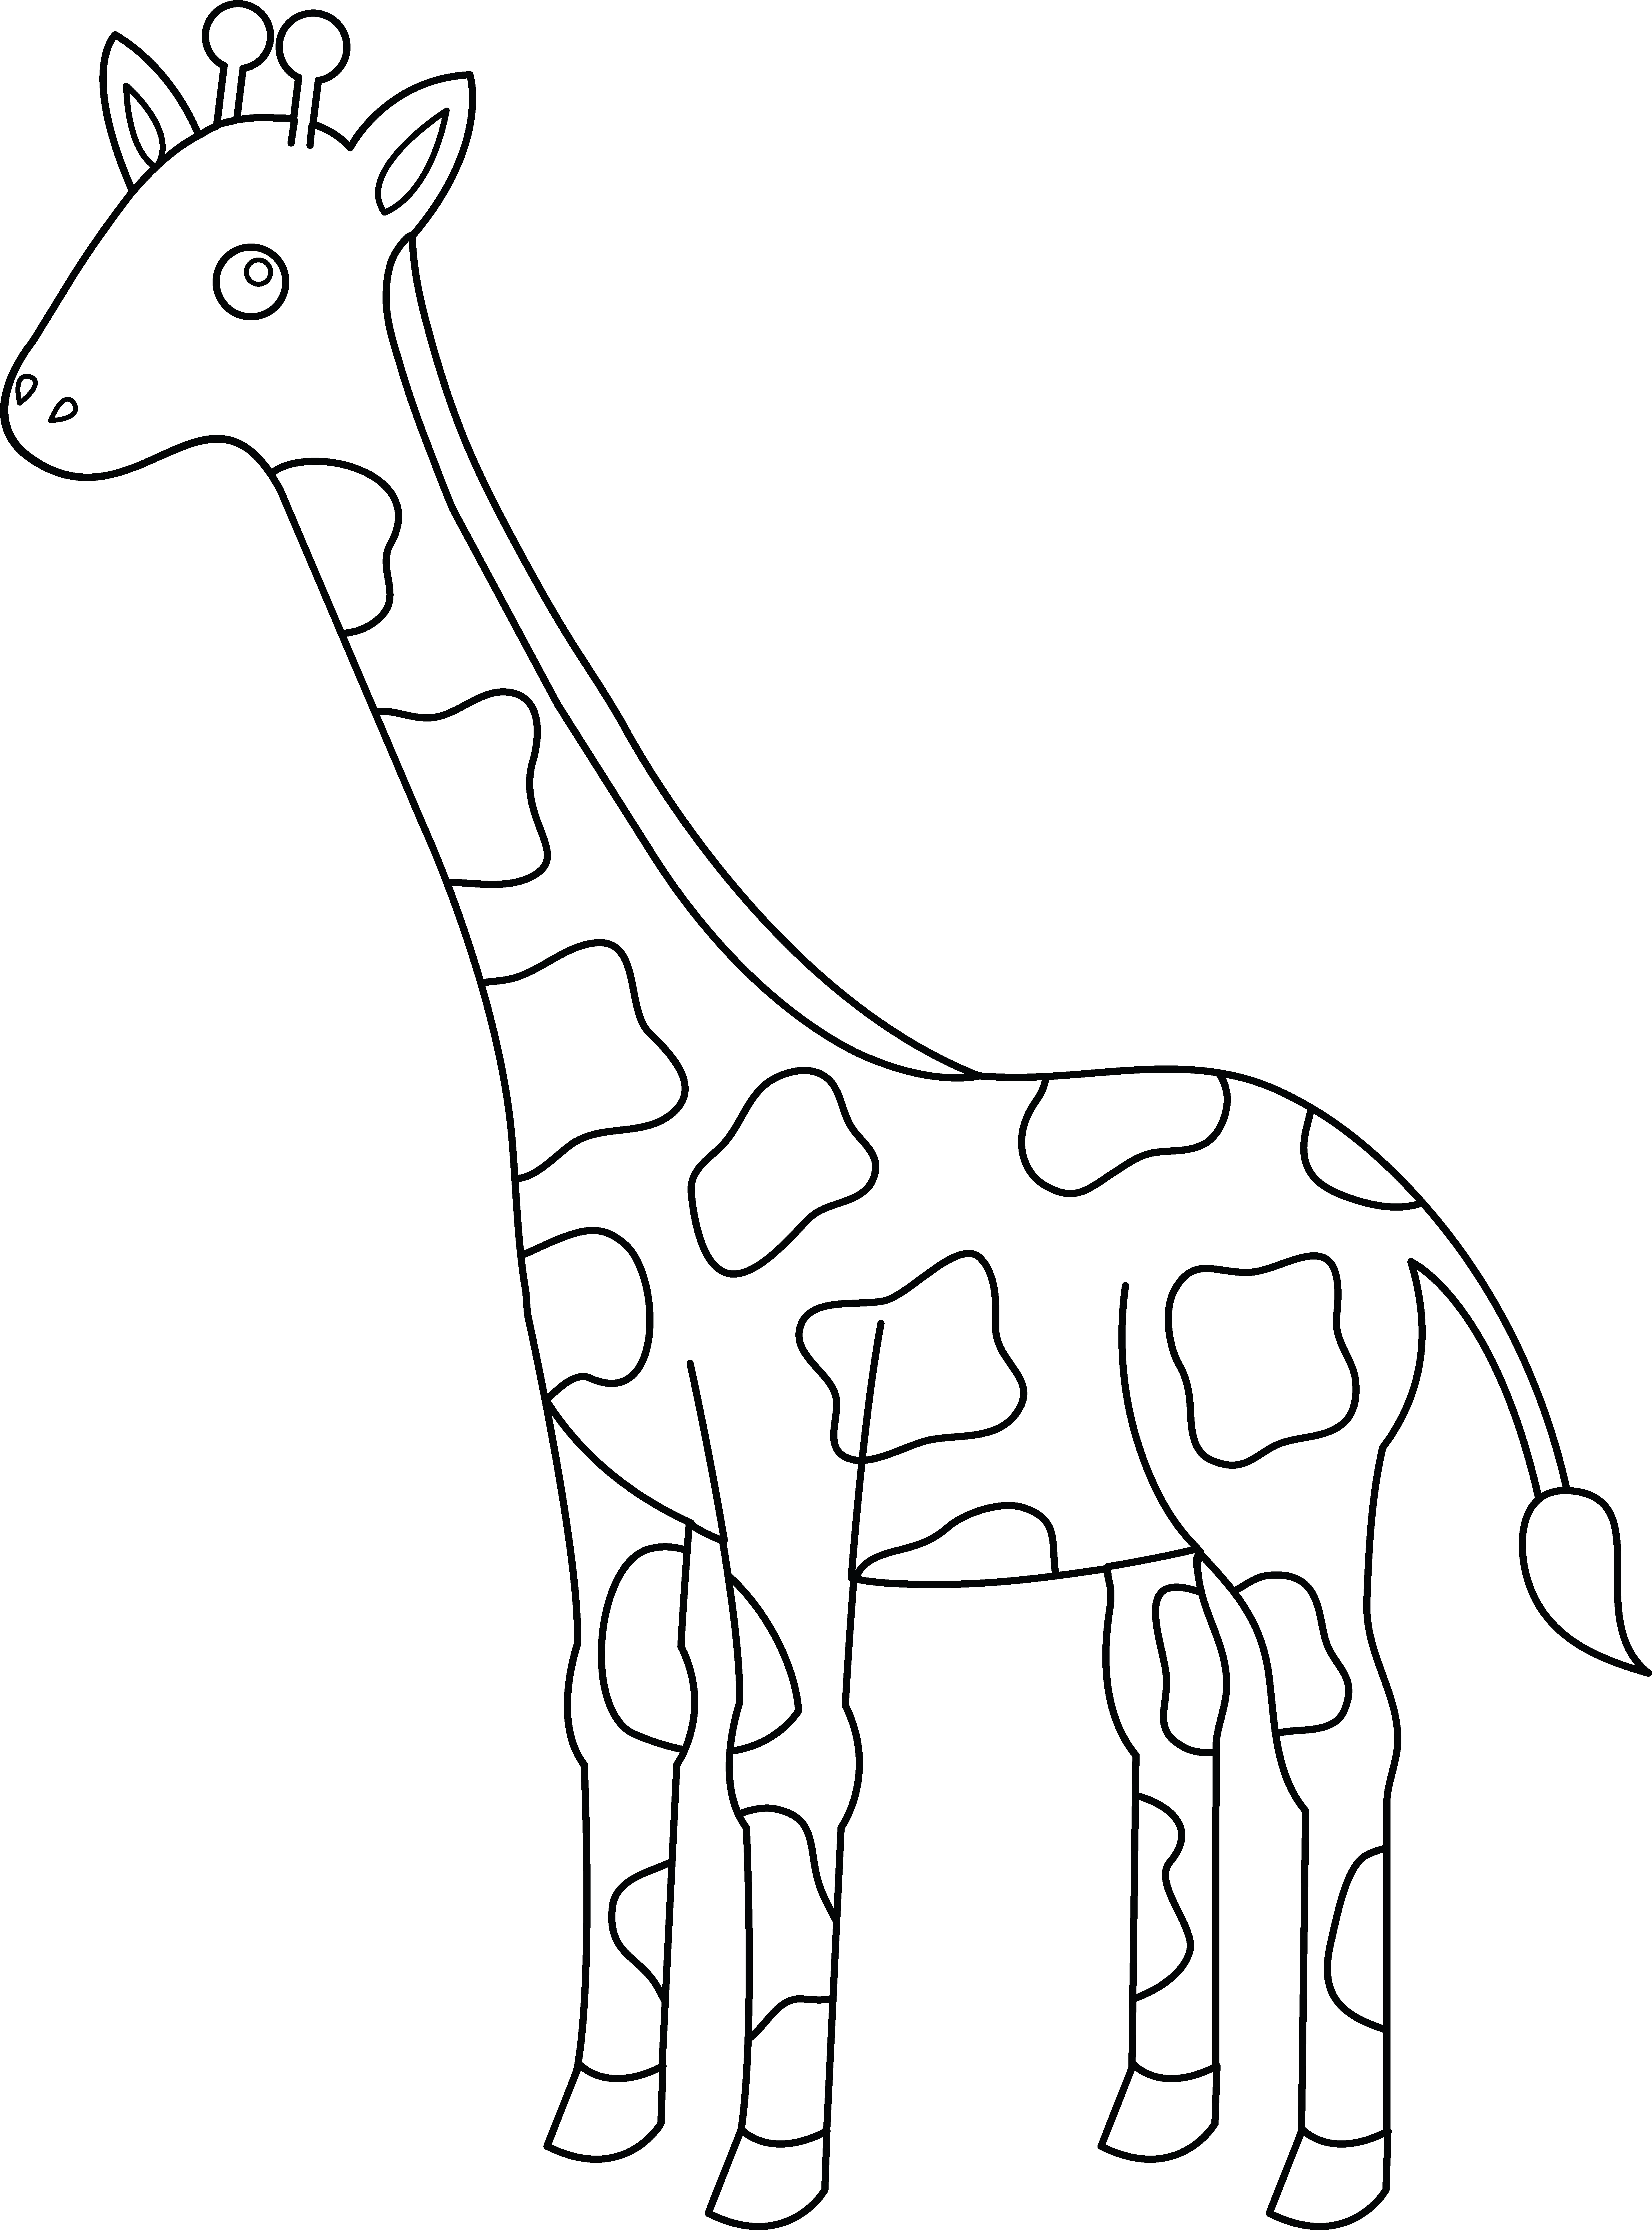 Giraffe-cartoon-coloring-pages - Cliparts.co